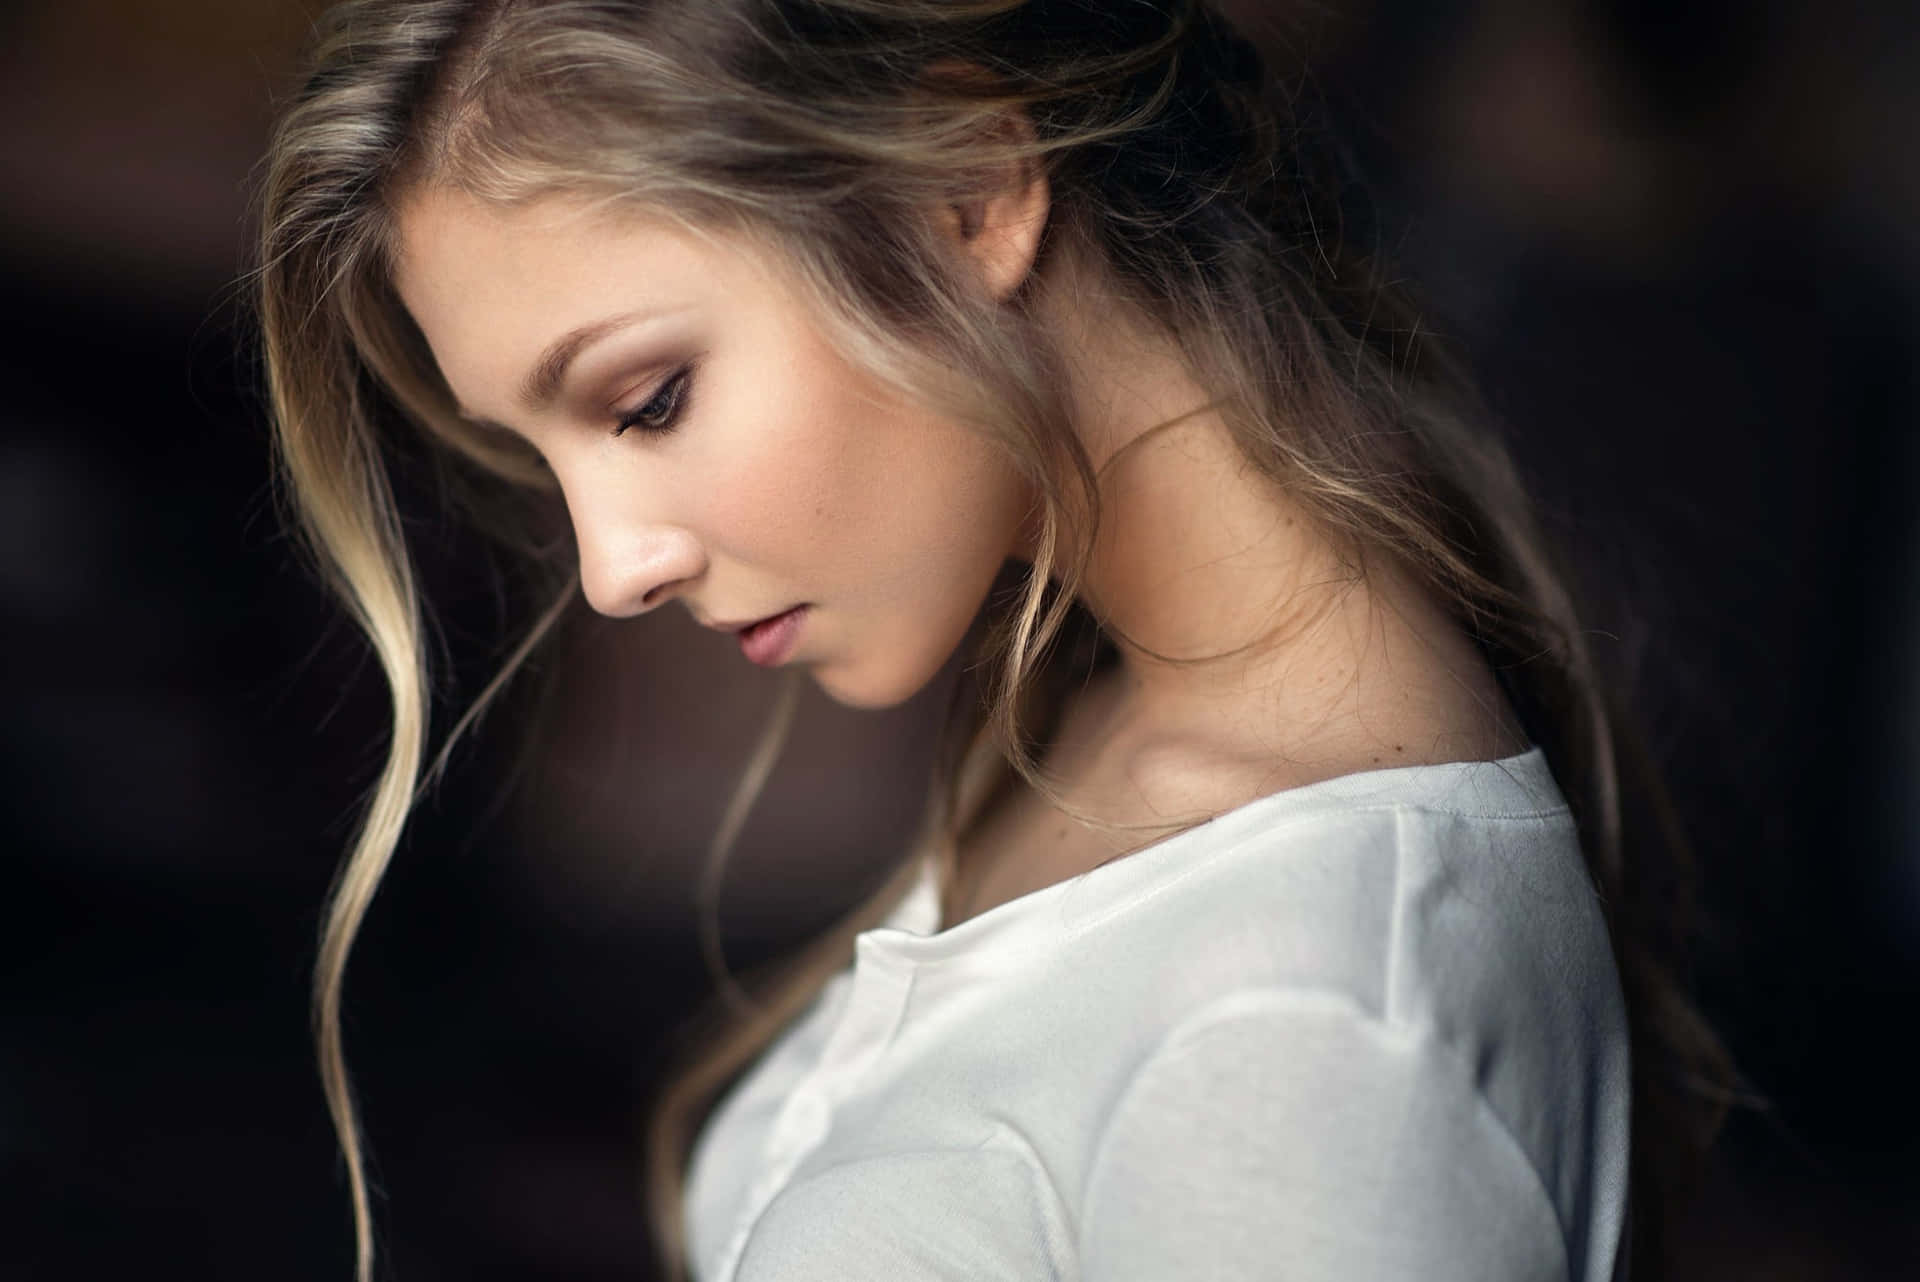 A Young Woman With Long Hair Looking Away